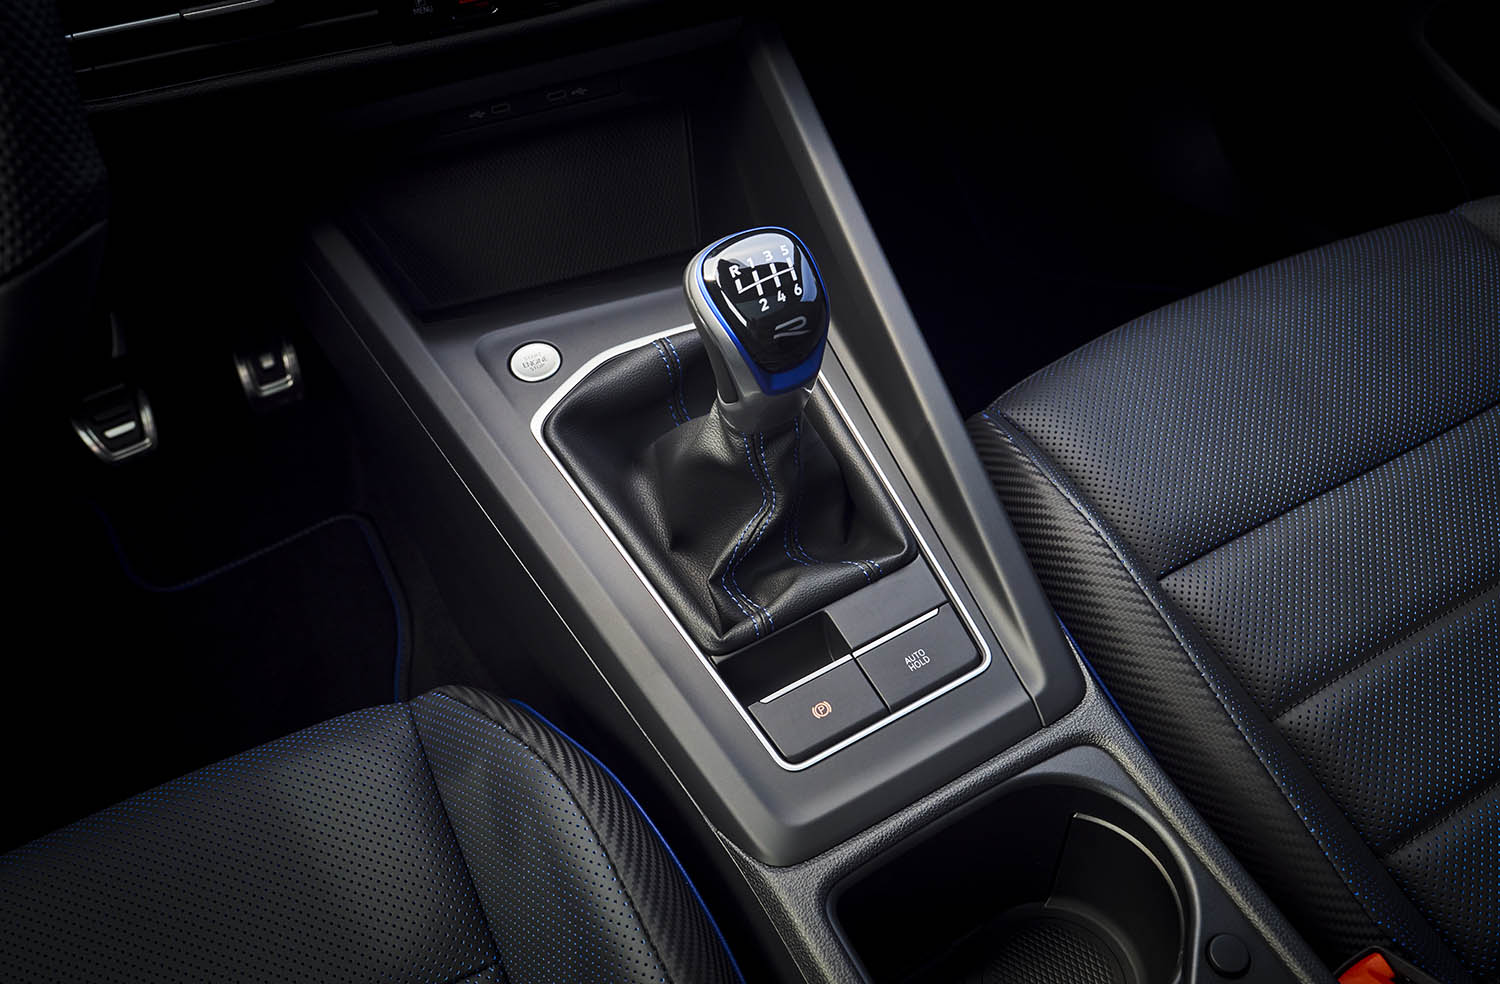 View of the center console in a 2022 Volkswagen Golf R with hill-start assist auto hold button below the shift knob.